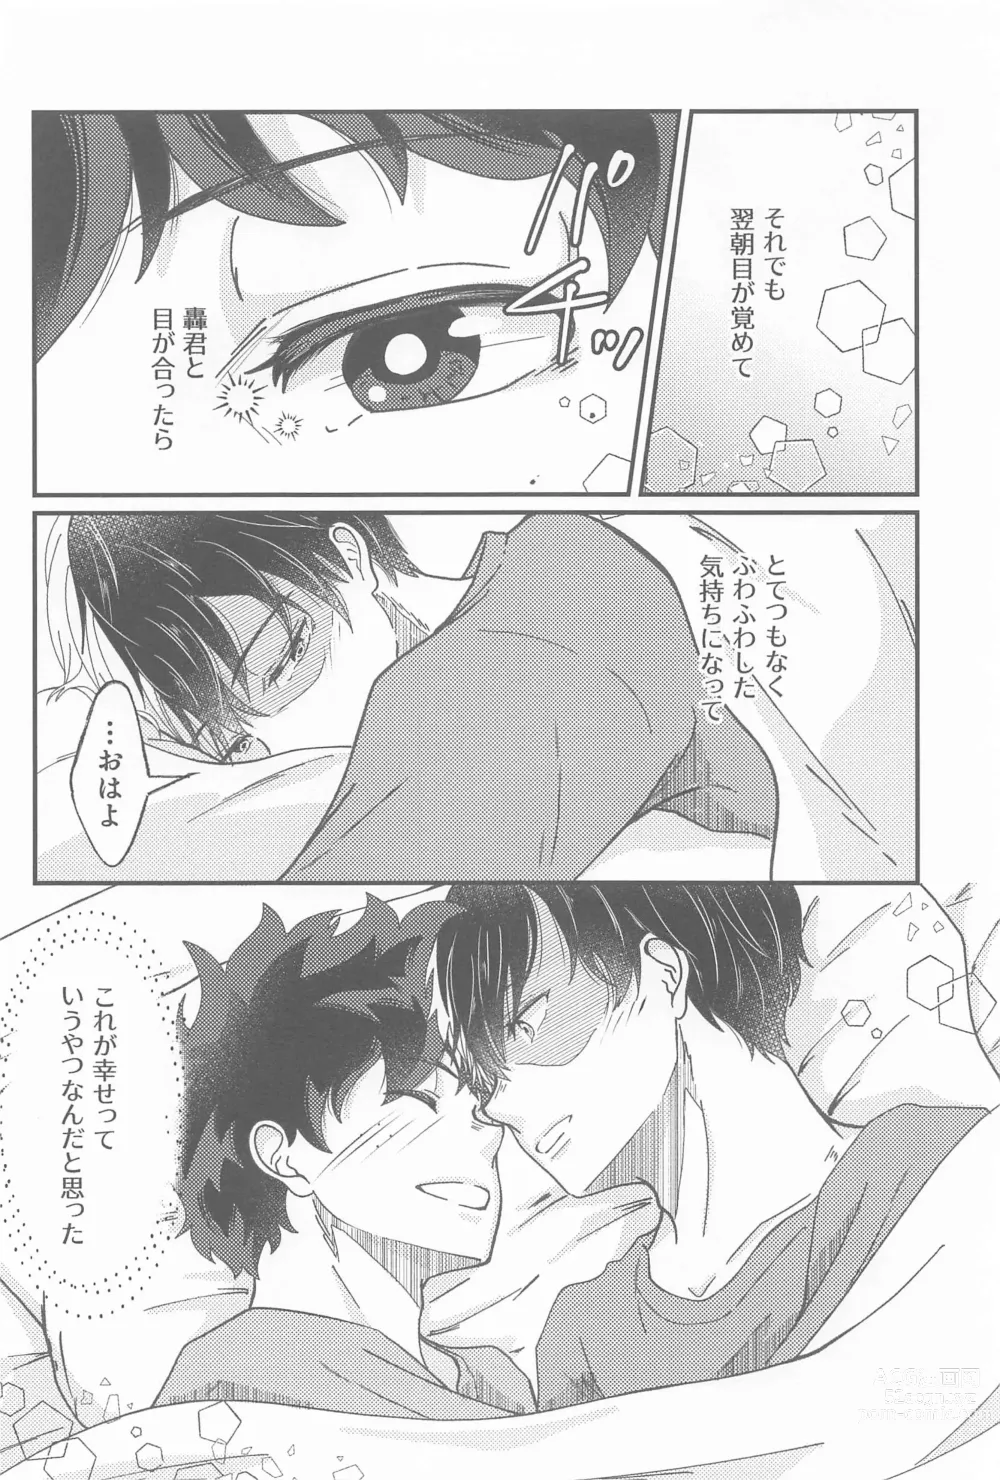 Page 5 of doujinshi Second Sweet